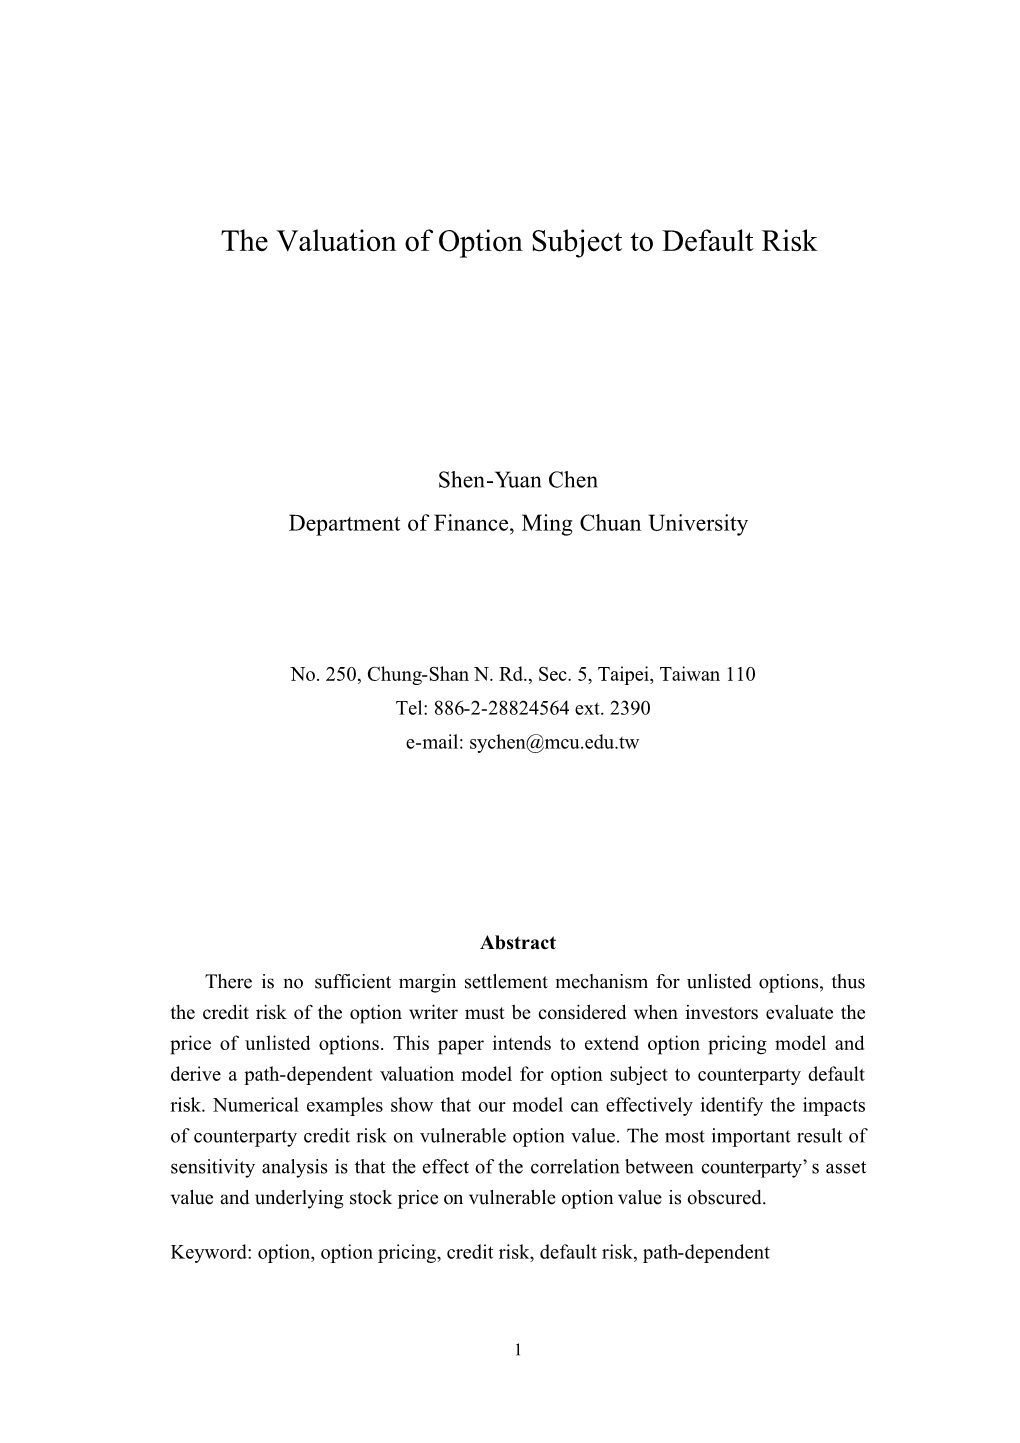 The Valuation of Option Subject to Default Risk